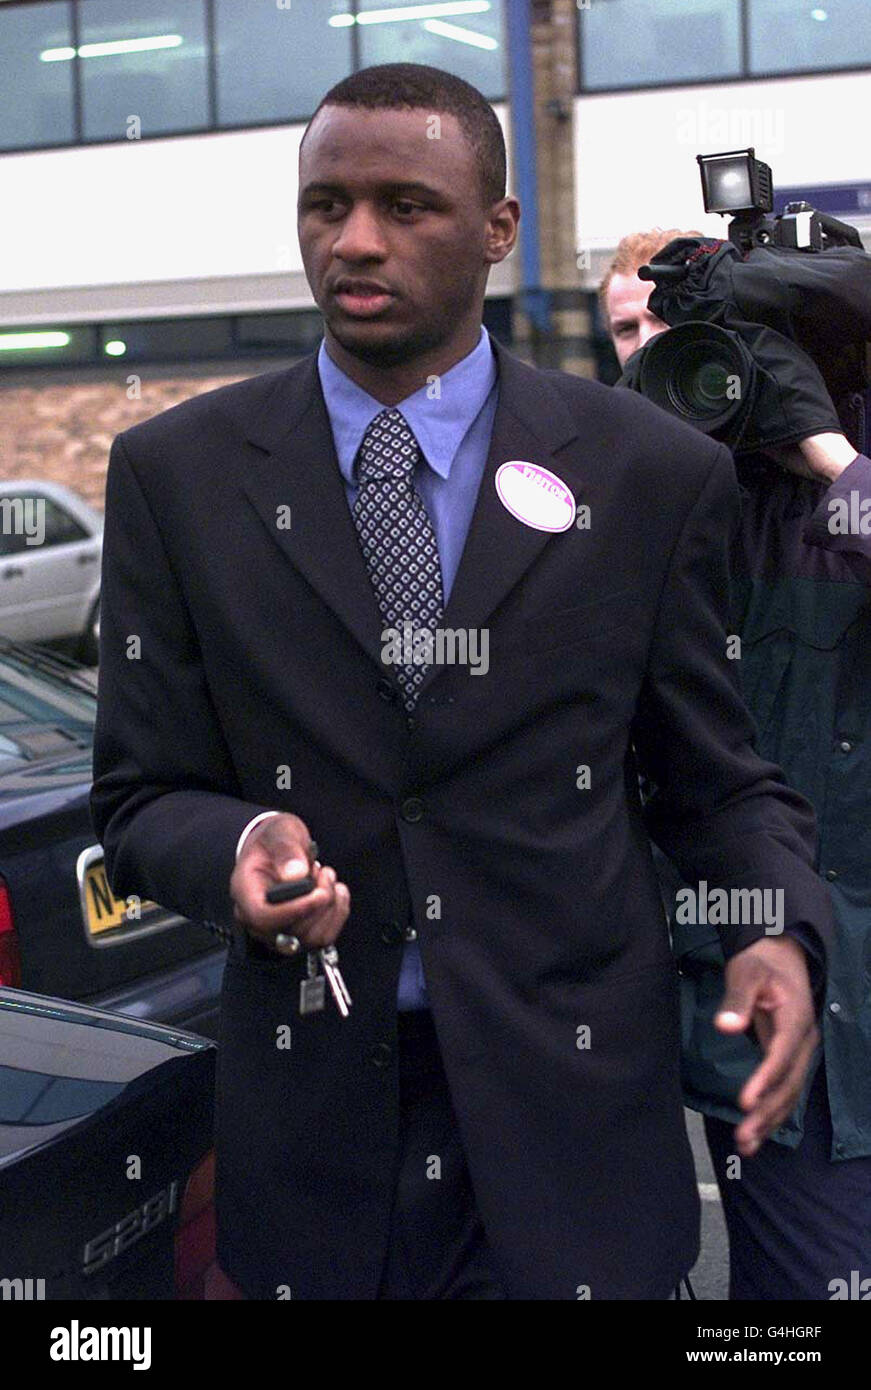 Arsenal footballer Patrick Vieira leaves a FA disciplinary hearing at Birmingham City's ground, St. Andrews, today (Monday). SEE PA Story SOCCER Wenger. Picture: DAVID JONES/PA *EDI* Stock Photo